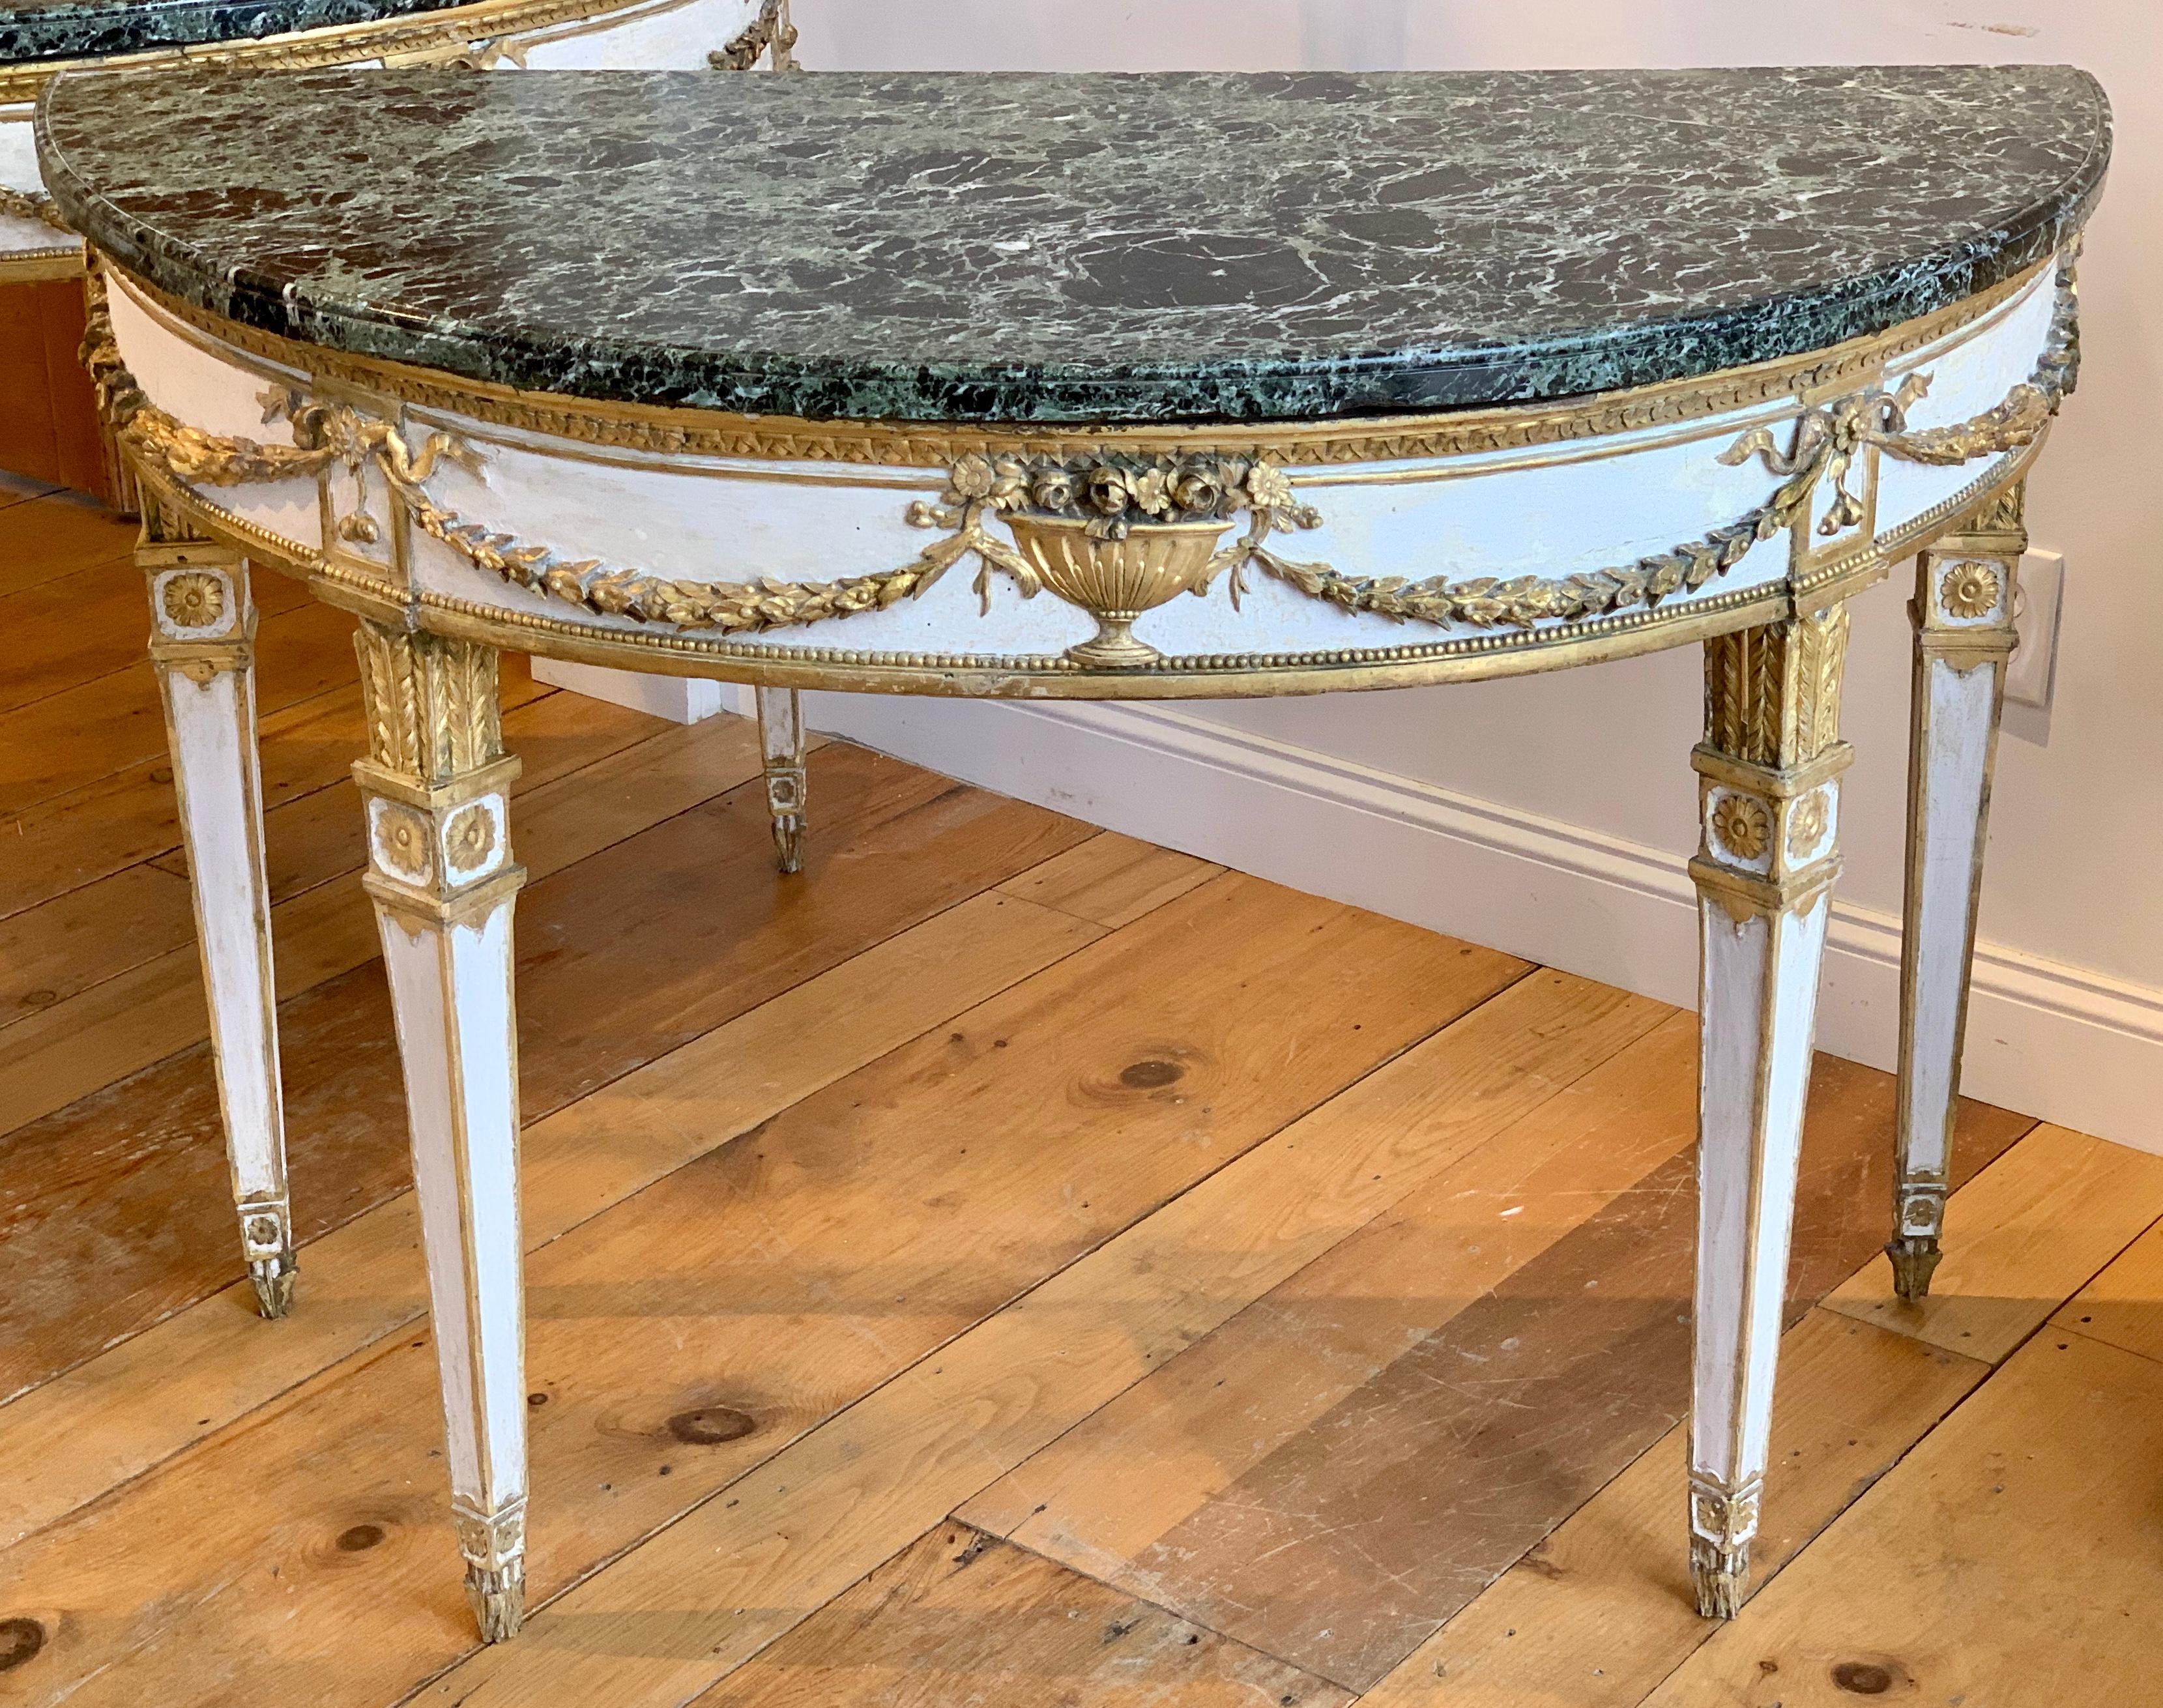 Pair of 18th Century Italian Neoclassical Demi-lune Console Tables.  Original Marble Tops.  All Carved and Parcel Gilt Wood.  Original recovered gilding.  Original surface recovered.  Realistically carved wood laurel swags, ribboned hanging fruit on